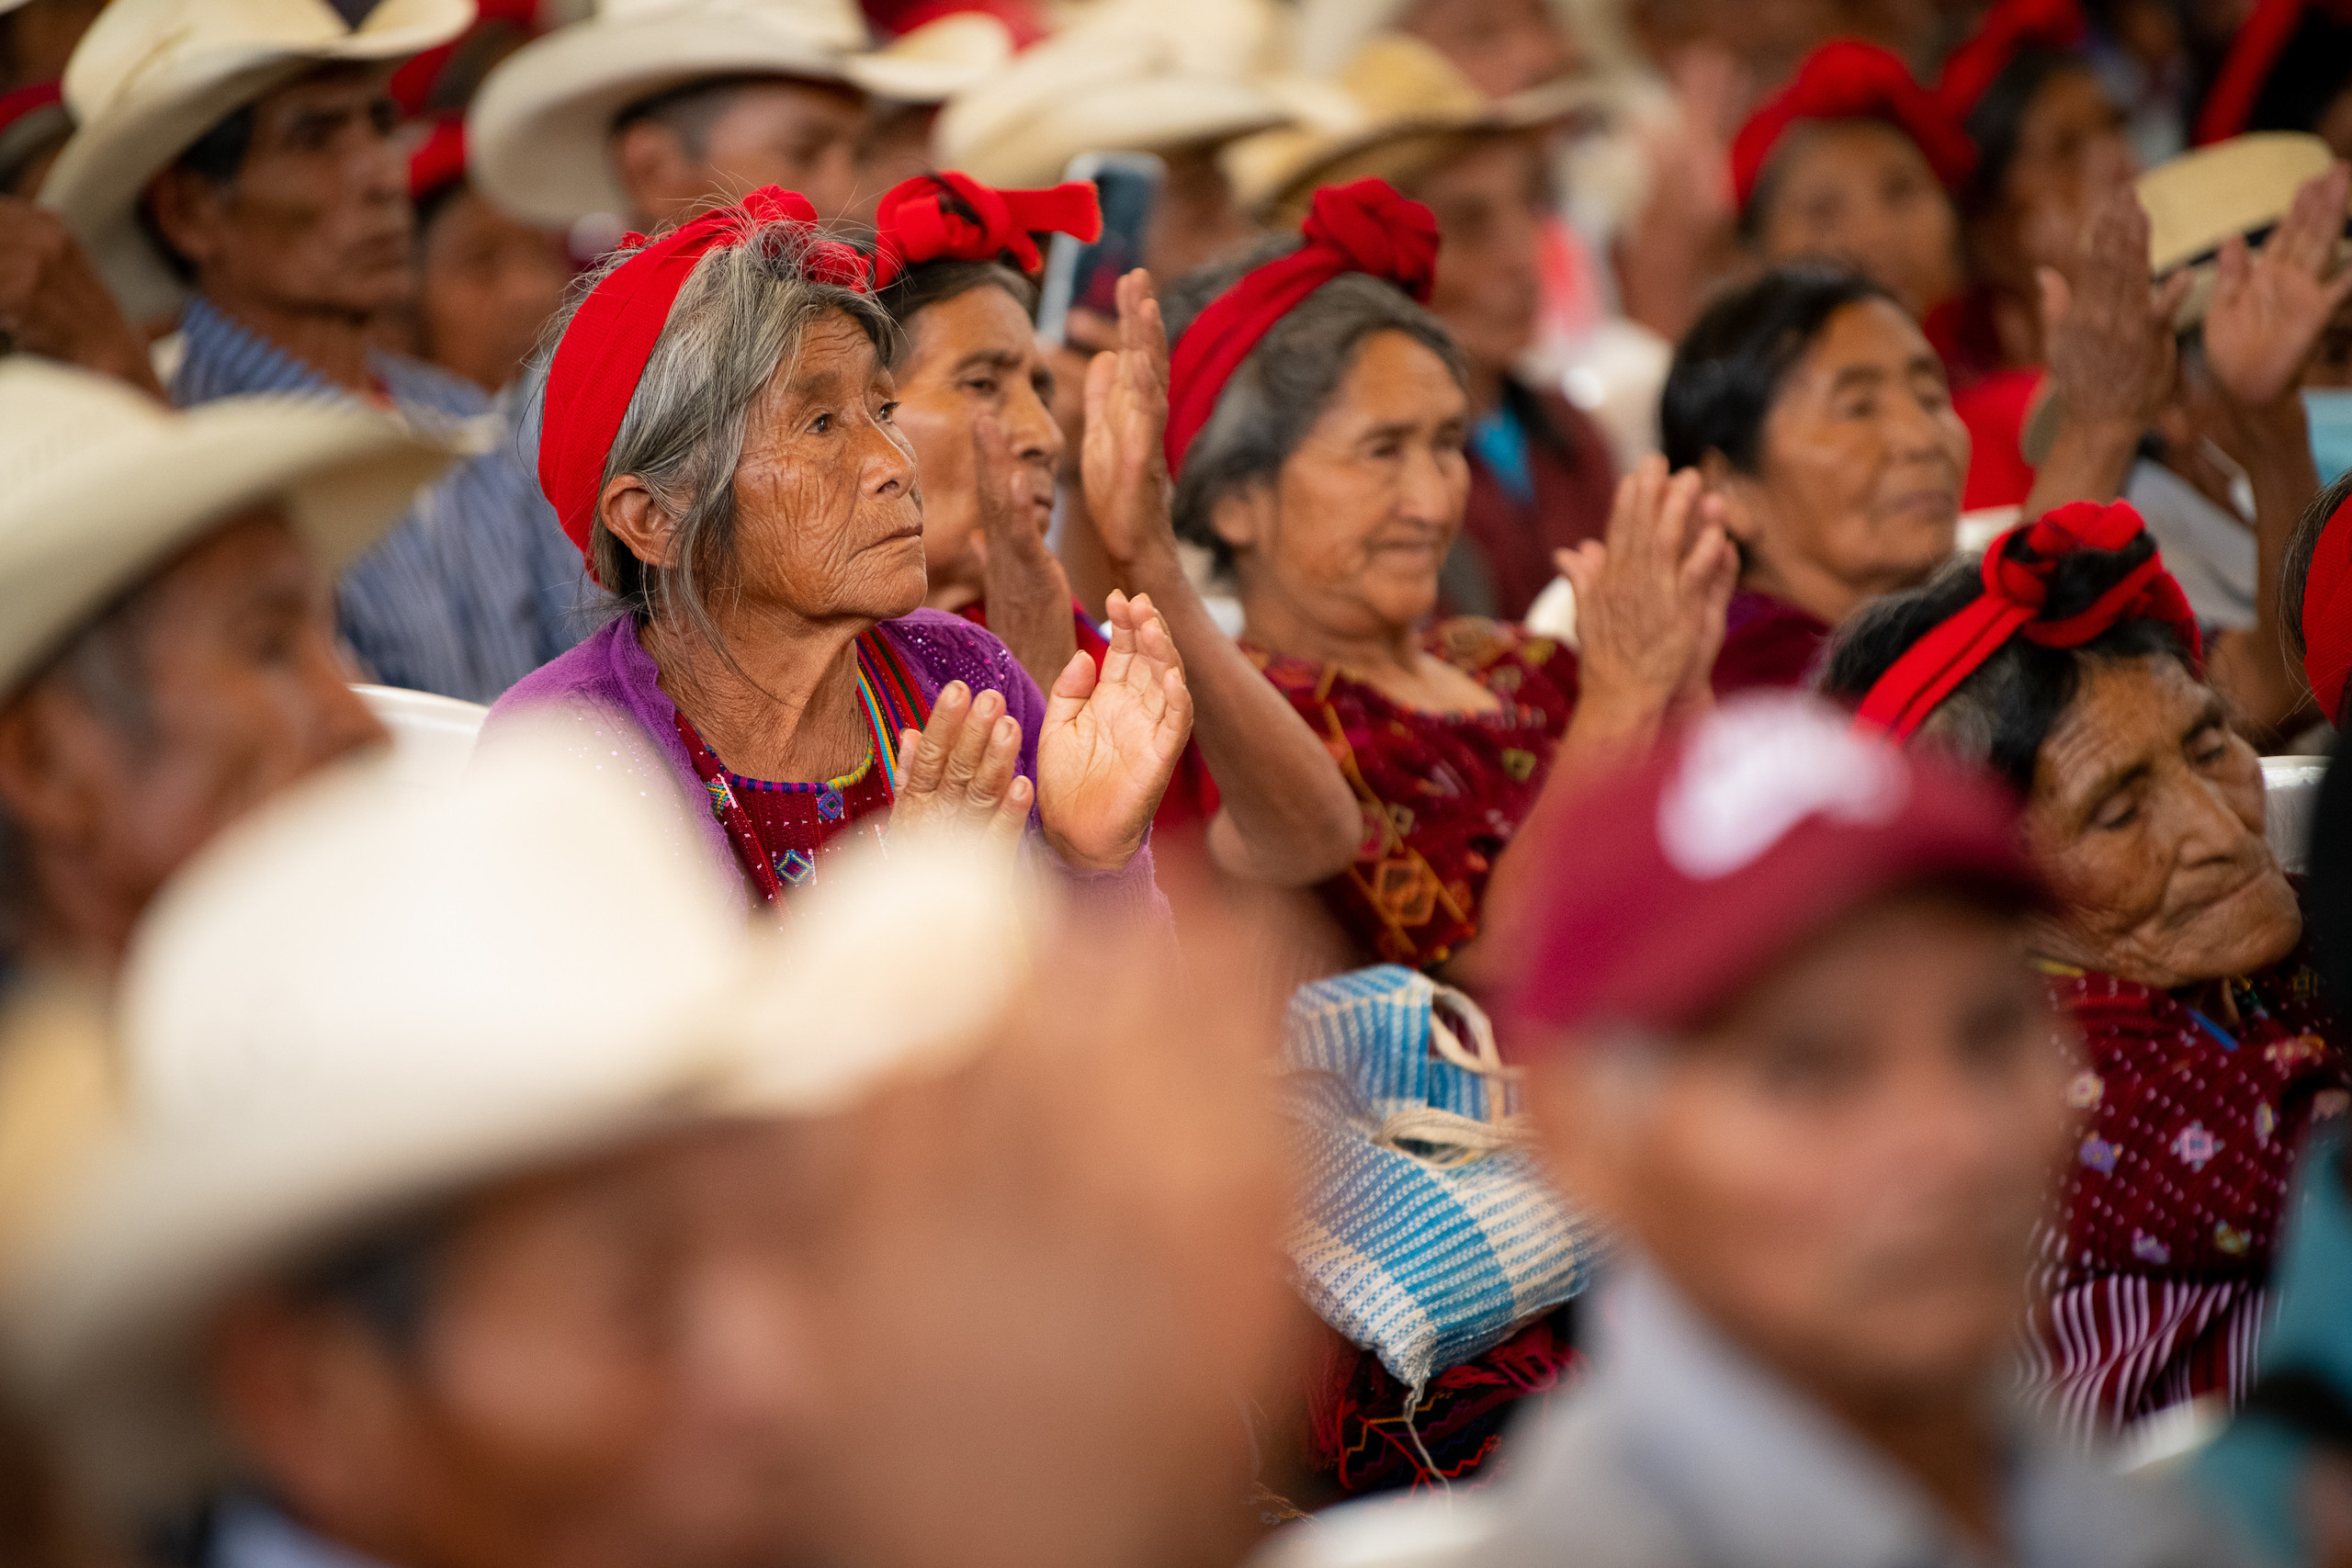 Within its government plan, the Semilla party has pledged to expand support for the communal lands and forests of Indigenous communities in Guatemala